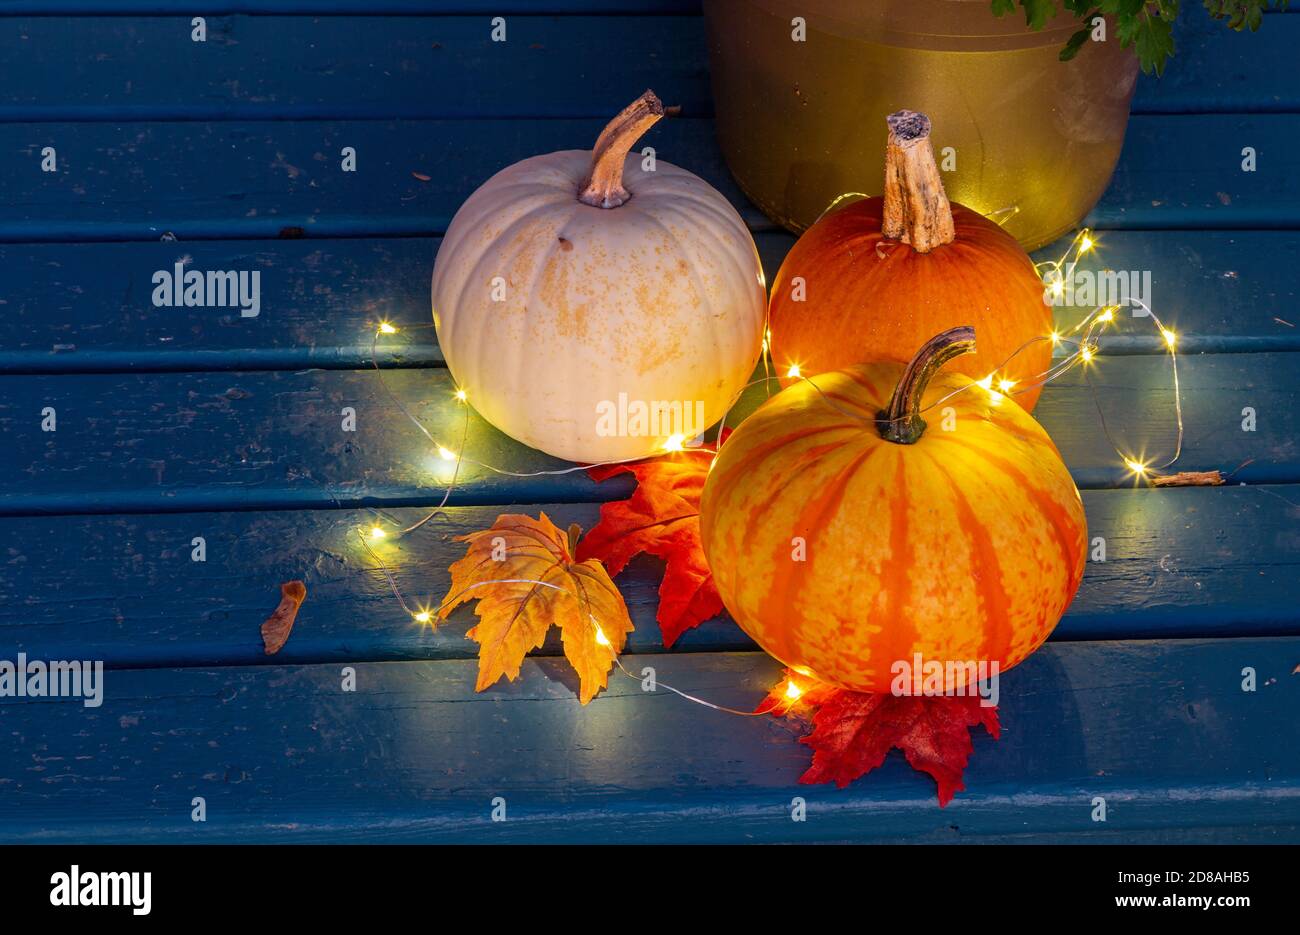 Little autumn gourds decorating a front doorstep. Stock Photo